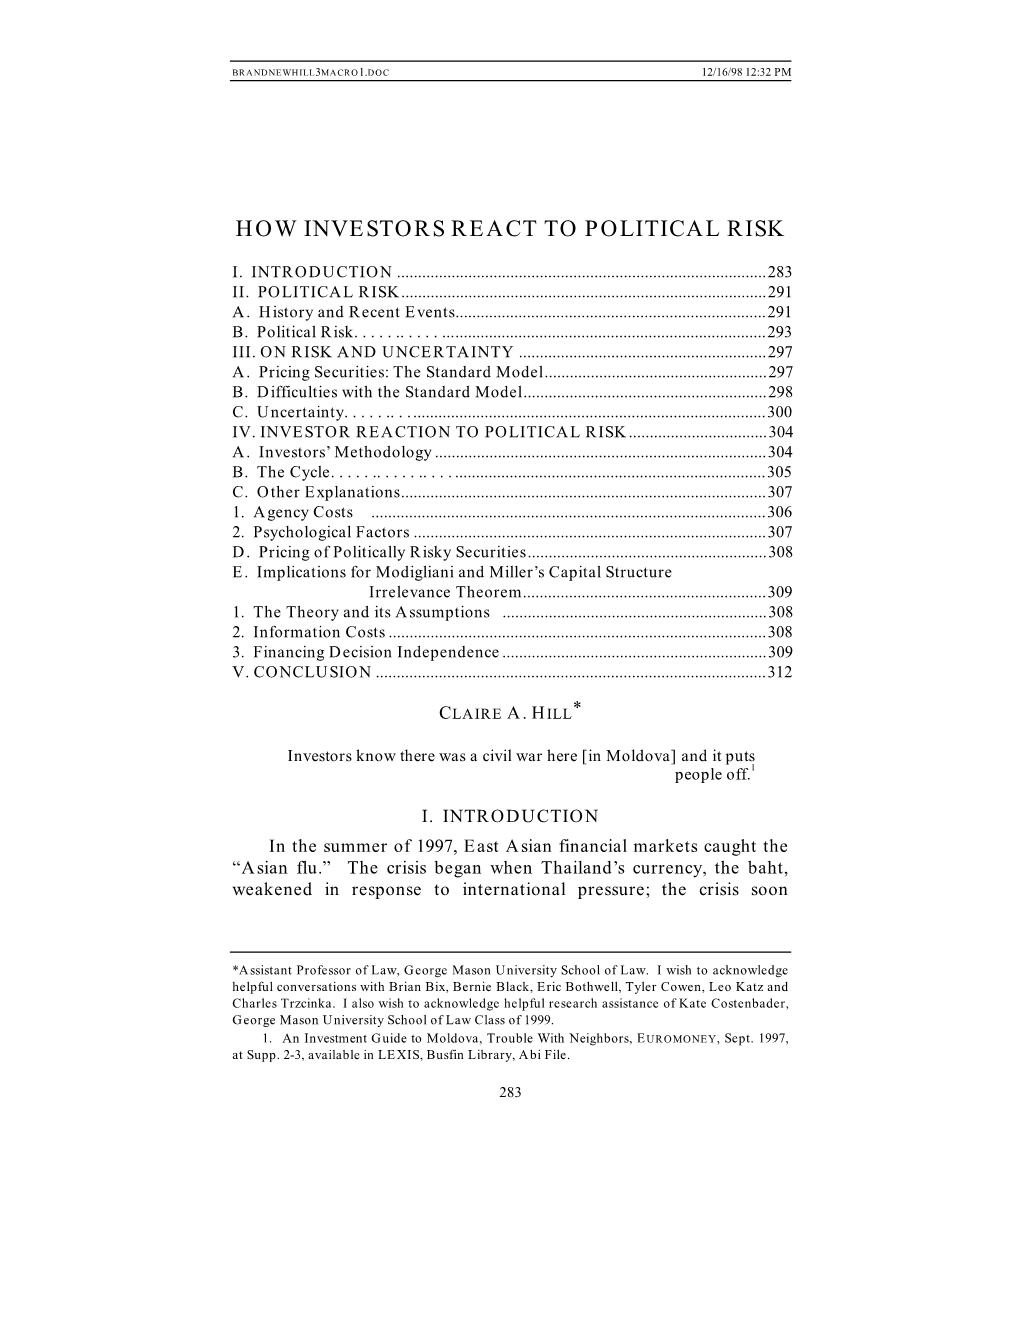 How Investors React to Political Risk